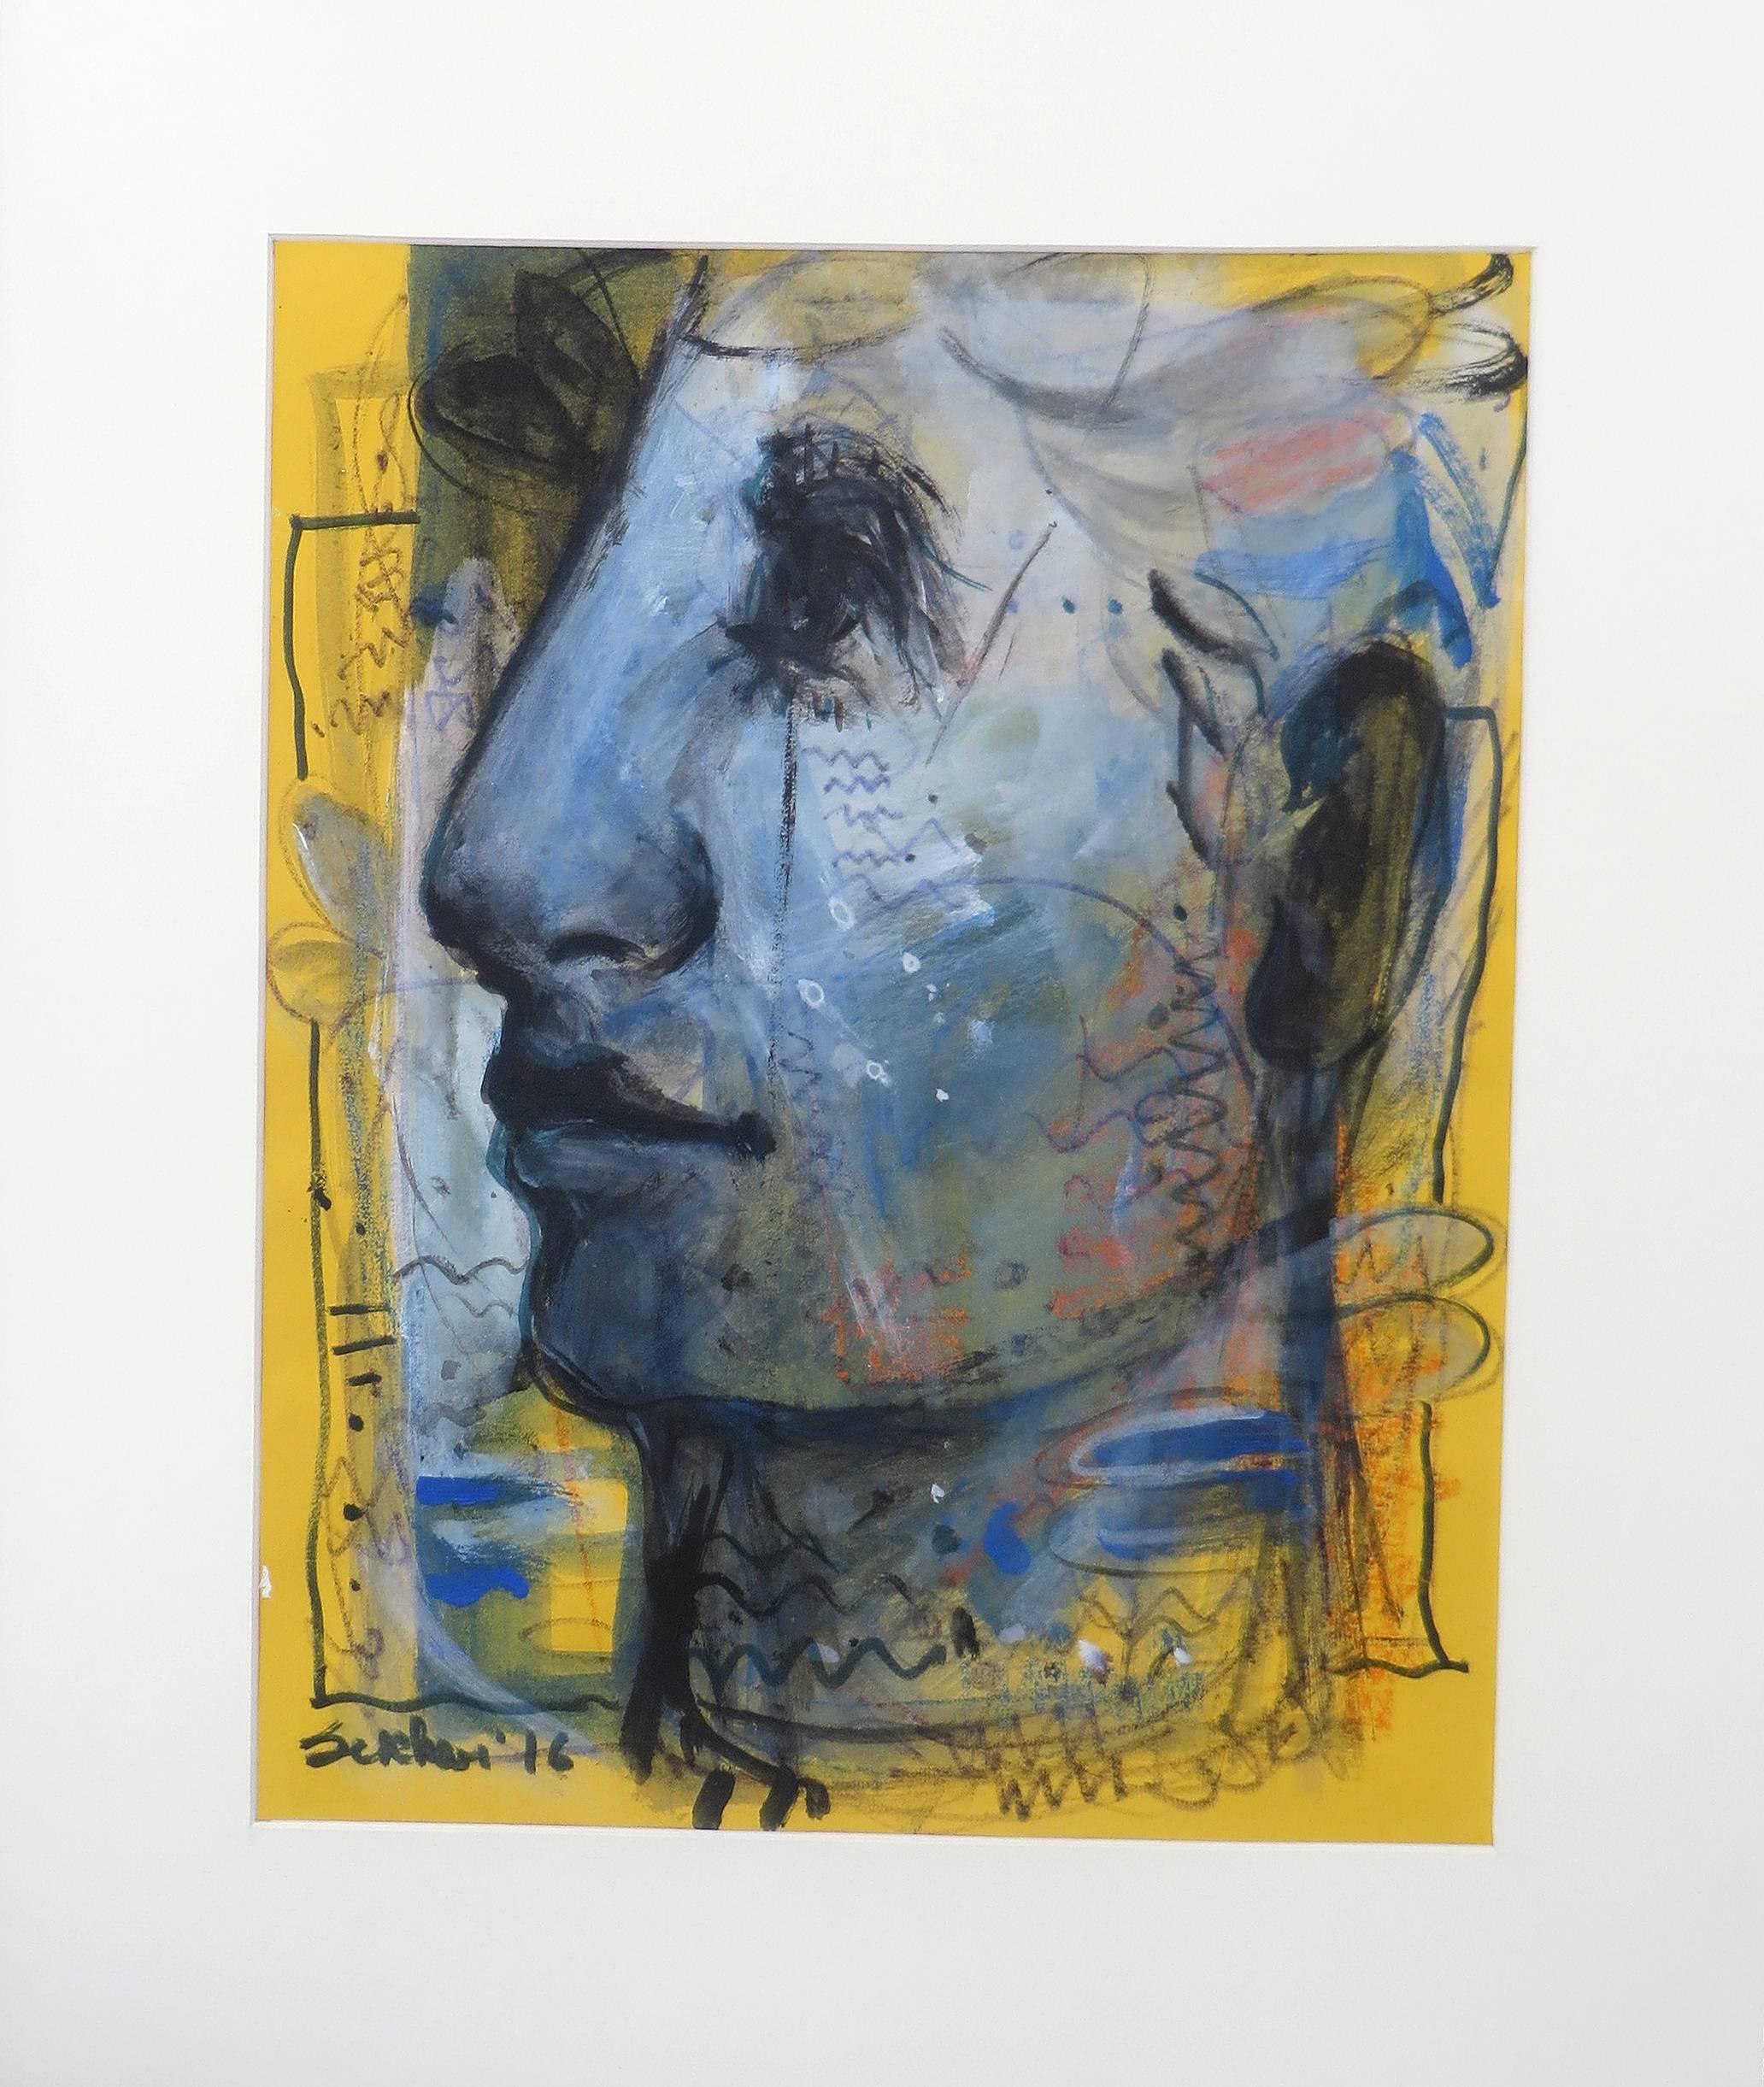 Faces, Moods, Expression, Mixed Media work by Contemporary Artist "In Stock"